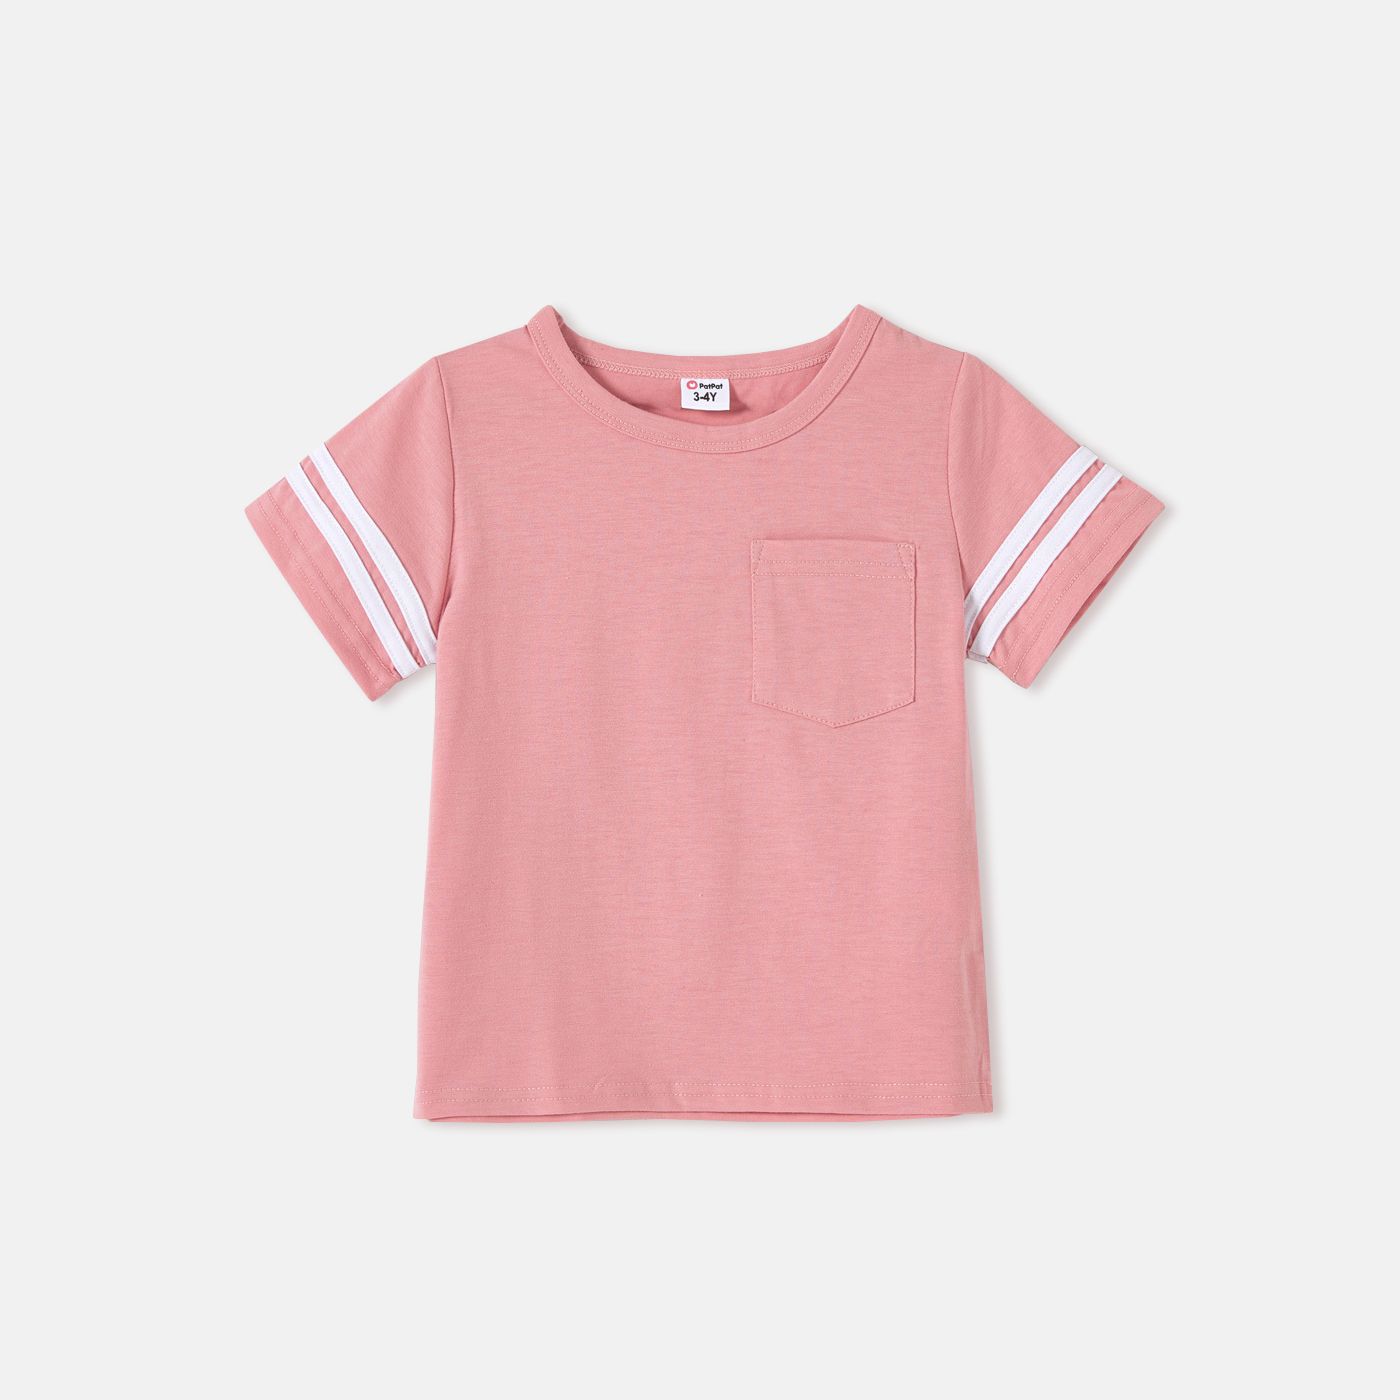 Family Matching Cotton Short-sleeve T-shirts And Pink Swiss Dot Lace Detail Flutter-sleeve Dresses Sets